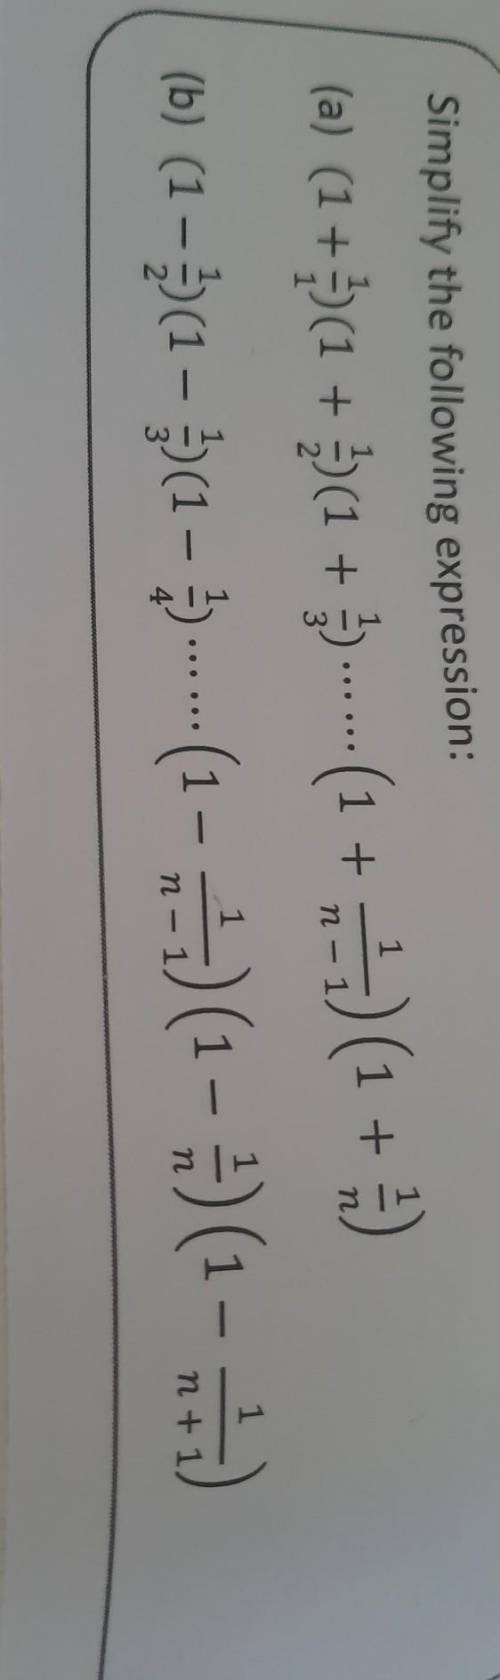 Please help!!! I need to solve it by formulas